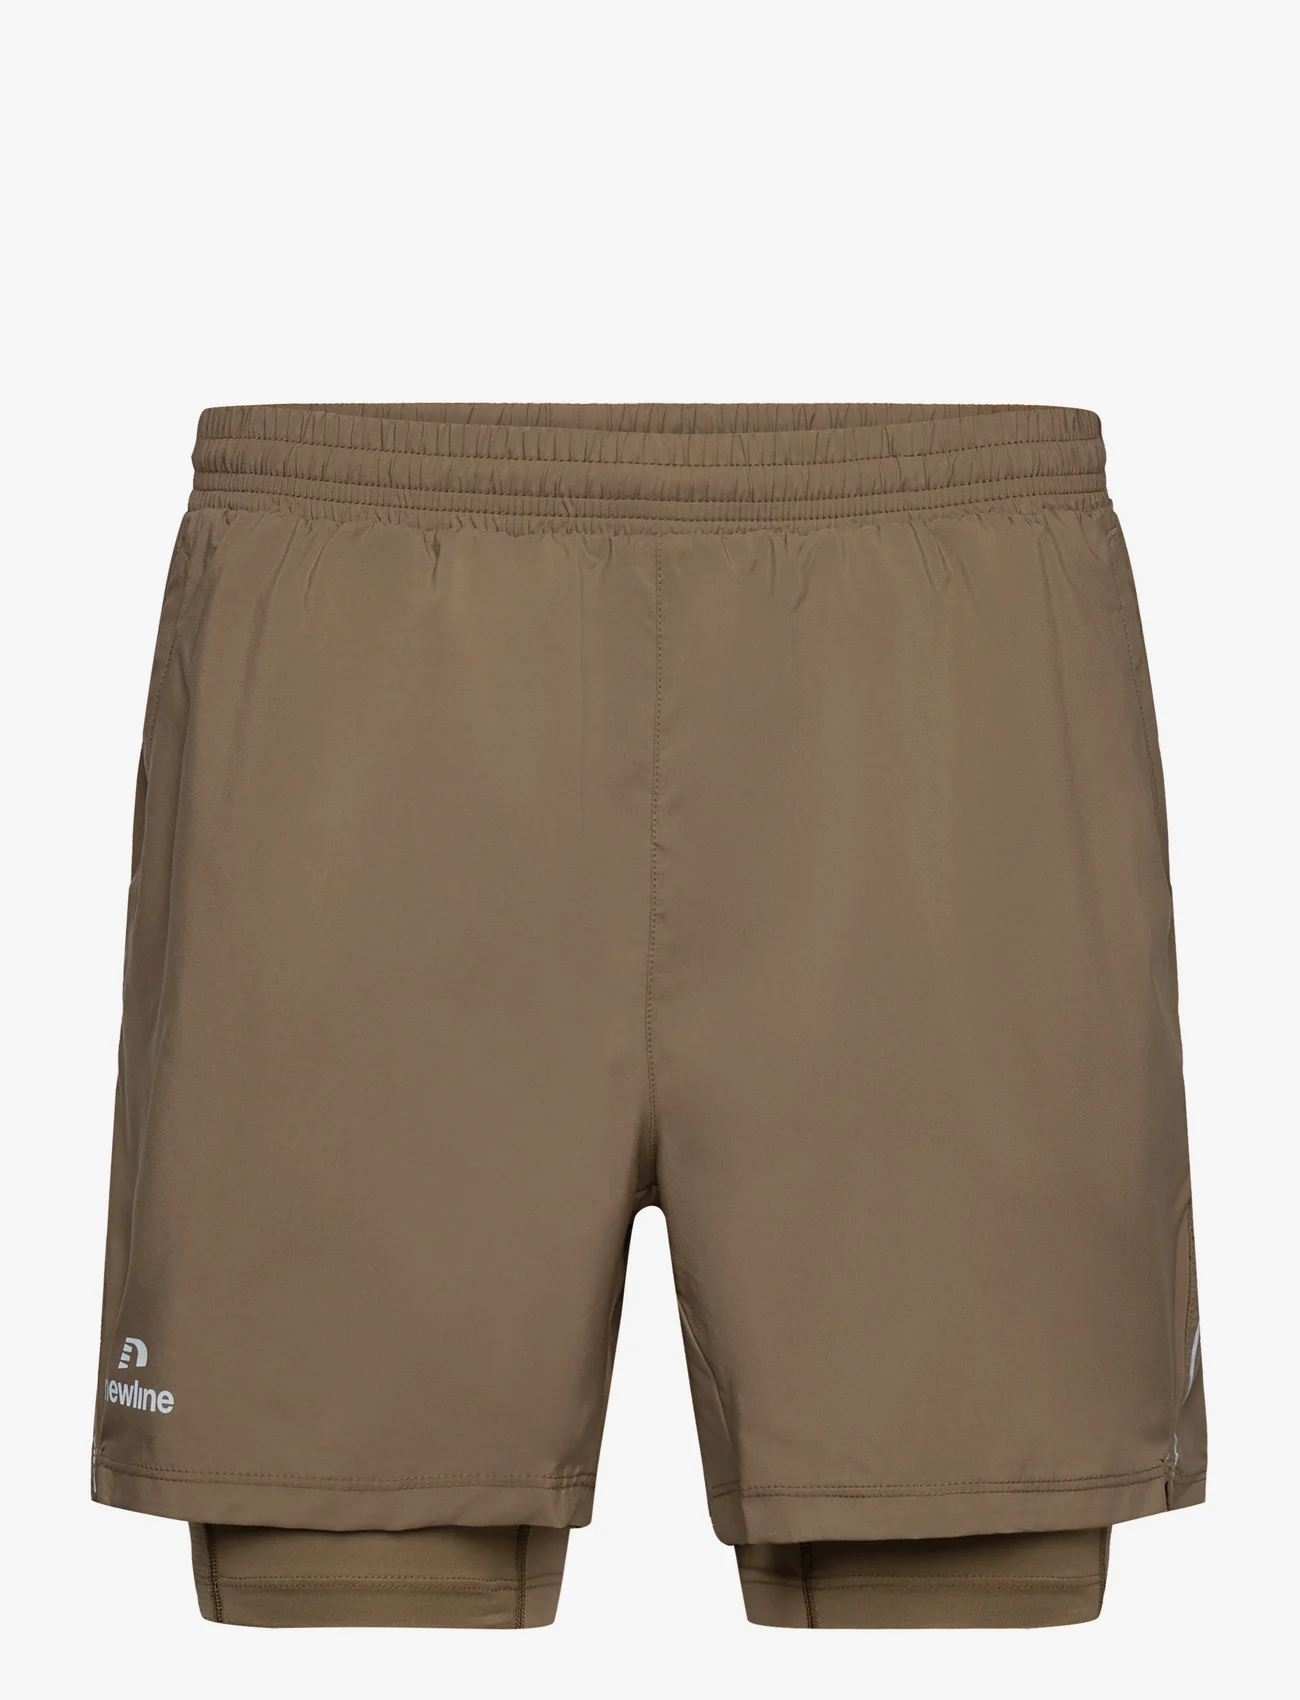 Newline - nwlFAST 2IN1 ZIP POCKET SHORTS - sports shorts - capers - 0